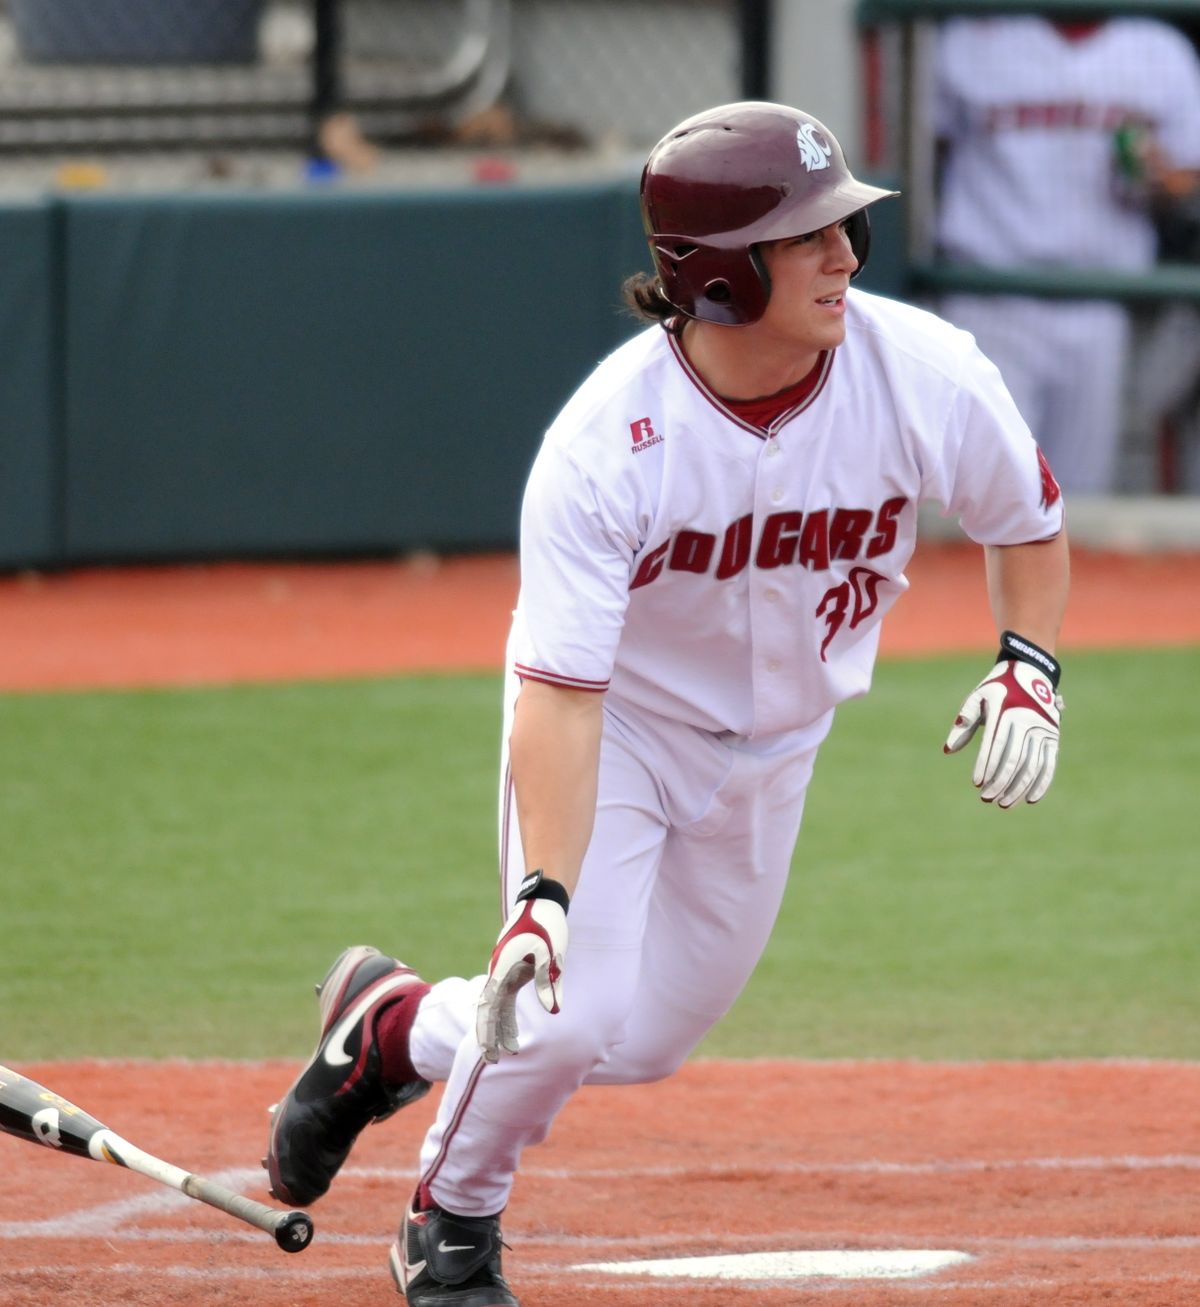 Jay Ponciano is hitting .378 with four home runs and 21 RBIs in 82 at bats. (Photo courtesy of WSU / The Spokesman-Review)